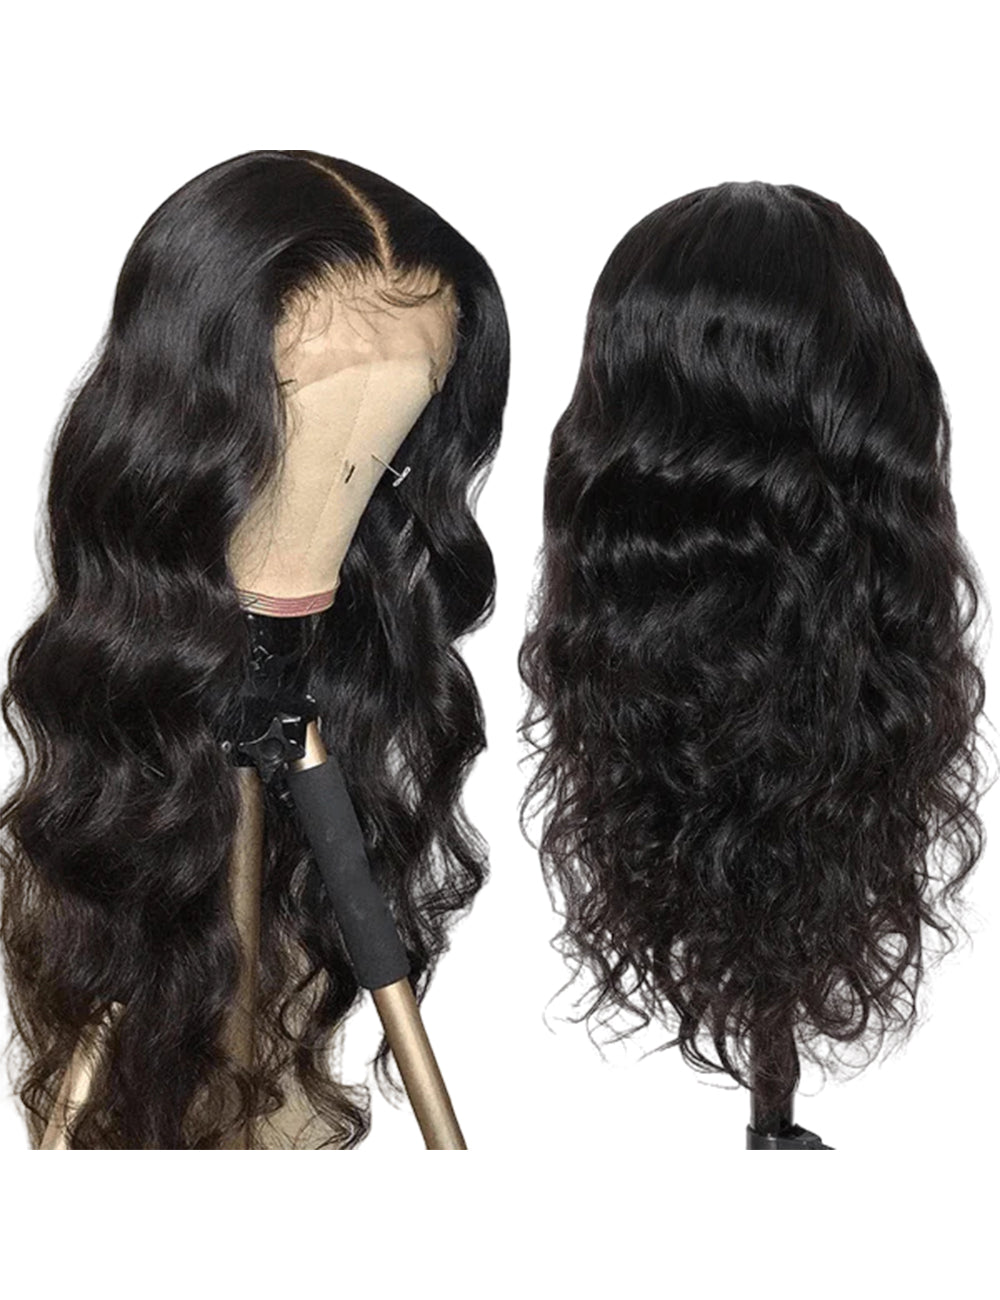 Body Wave Wig 13x4 Lace Frontal Wig HD Transparent Lace Wig Long Glueless Human Hair Wigs 32 Inch